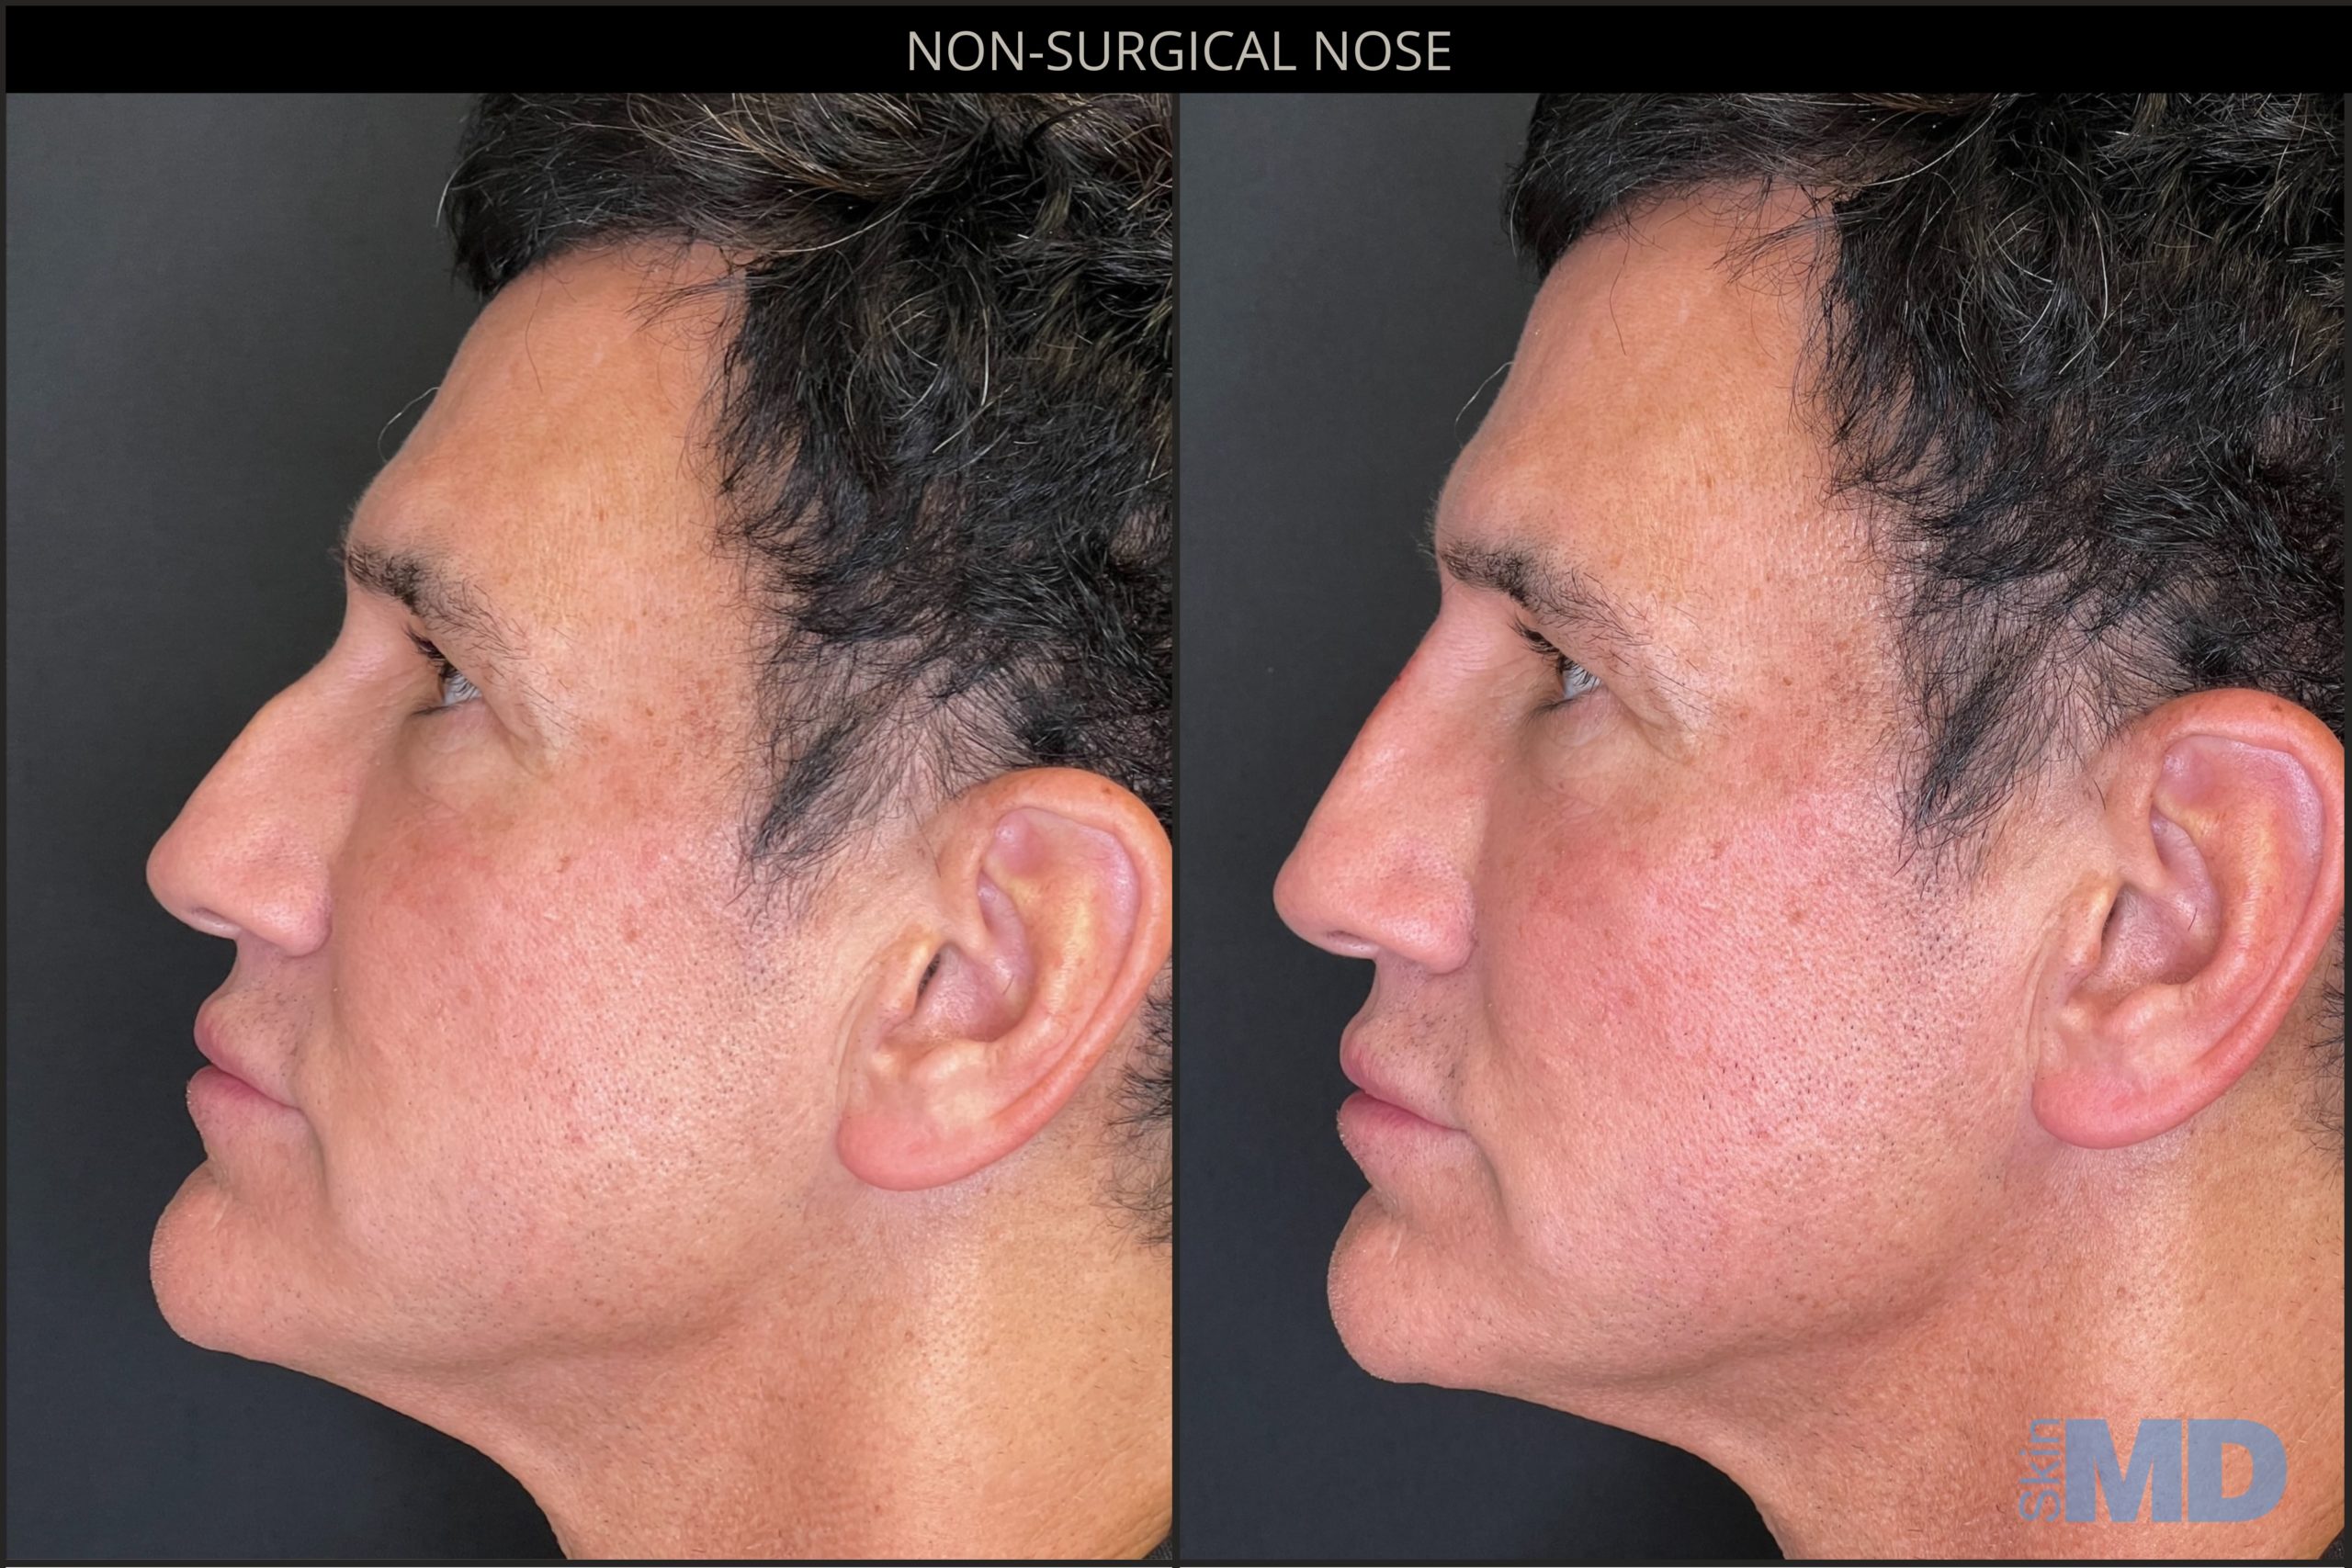 Before and after non-surgical nose treatment results